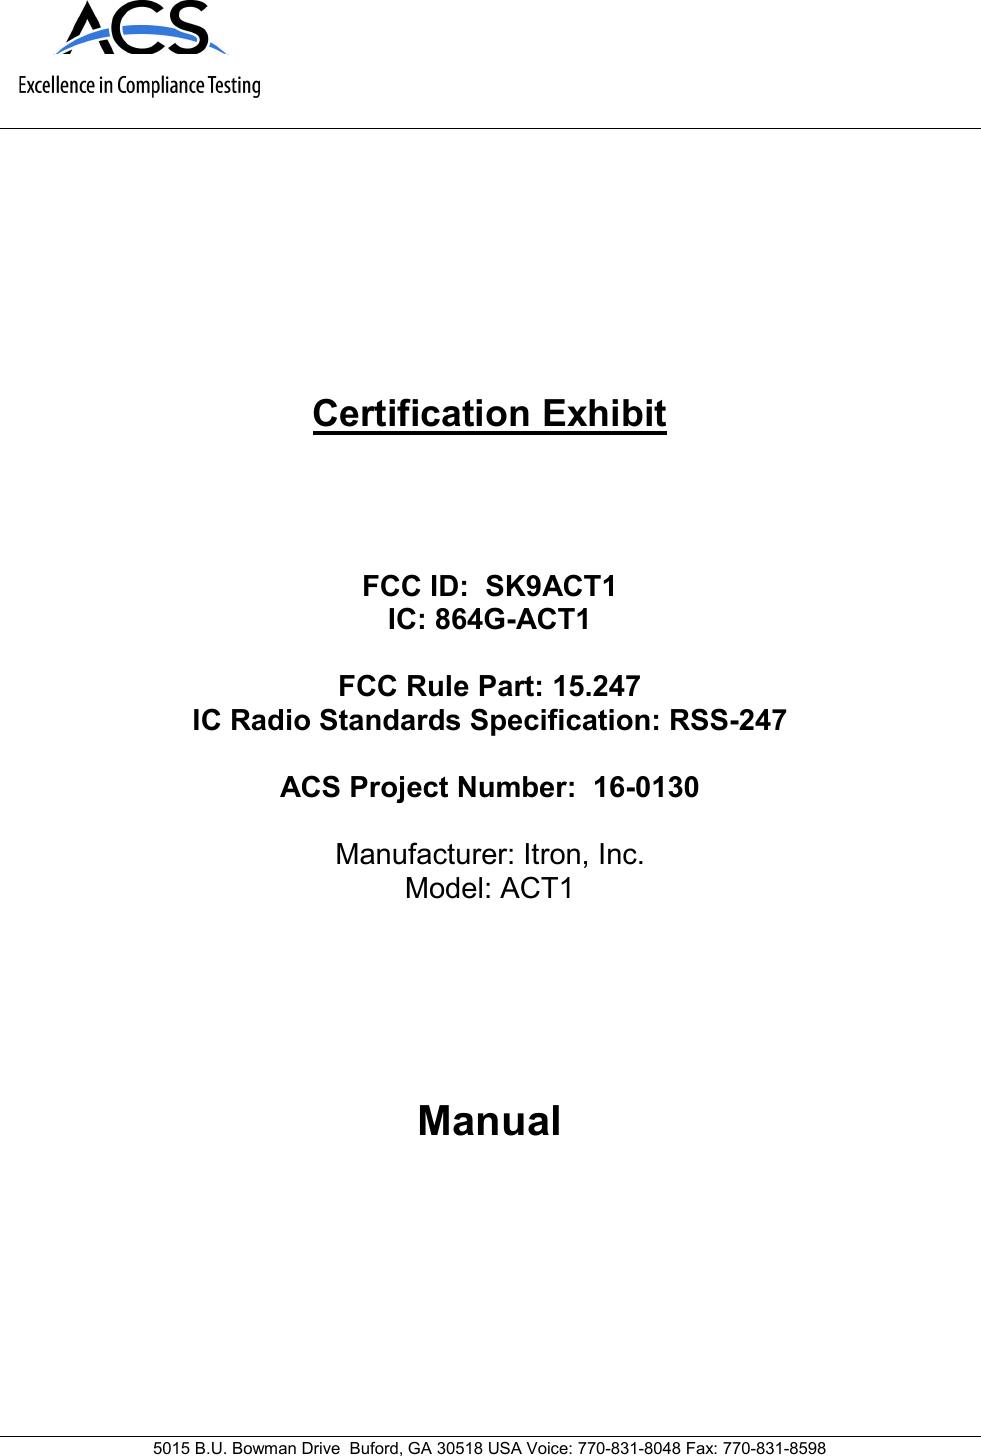      5015 B.U. Bowman Drive  Buford, GA 30518 USA Voice: 770-831-8048 Fax: 770-831-8598   Certification Exhibit     FCC ID:  SK9ACT1 IC: 864G-ACT1  FCC Rule Part: 15.247 IC Radio Standards Specification: RSS-247  ACS Project Number:  16-0130   Manufacturer: Itron, Inc. Model: ACT1     Manual   